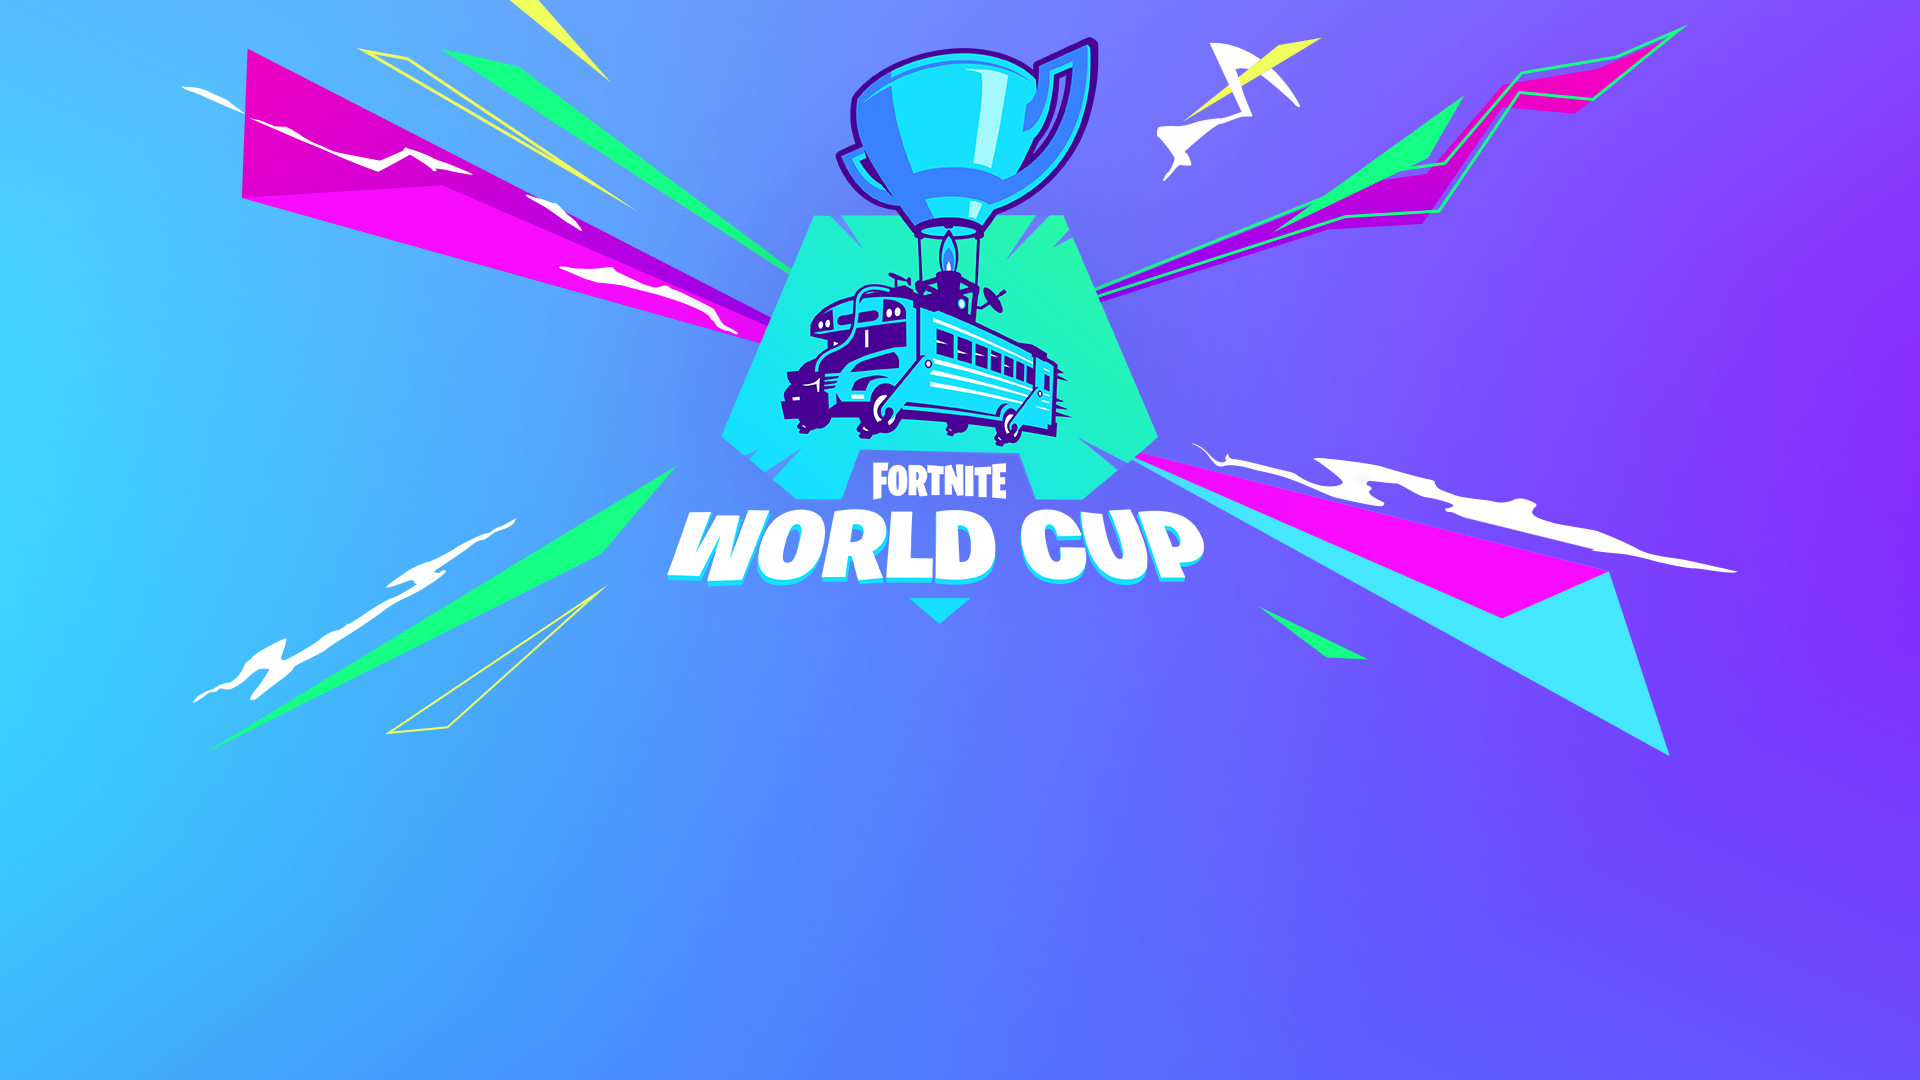 Fortnite World Cup Details and 2019 Prize Pool Info